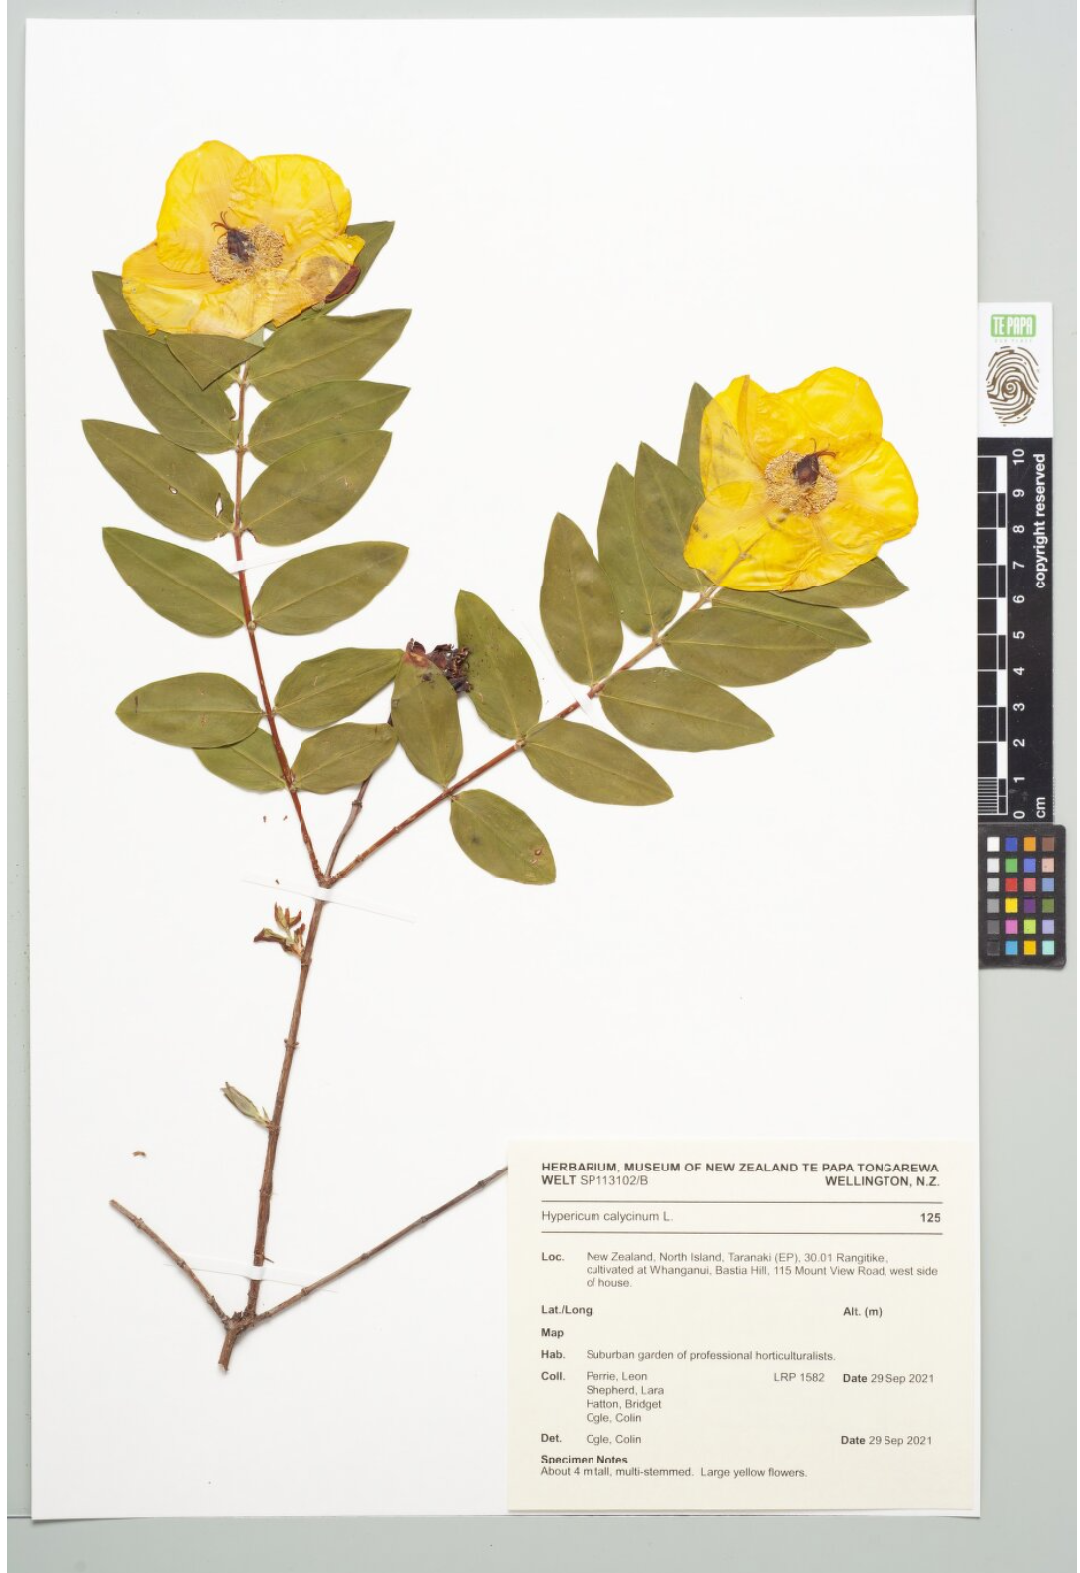 A pressed specimen showing leaves and two yellow flowers